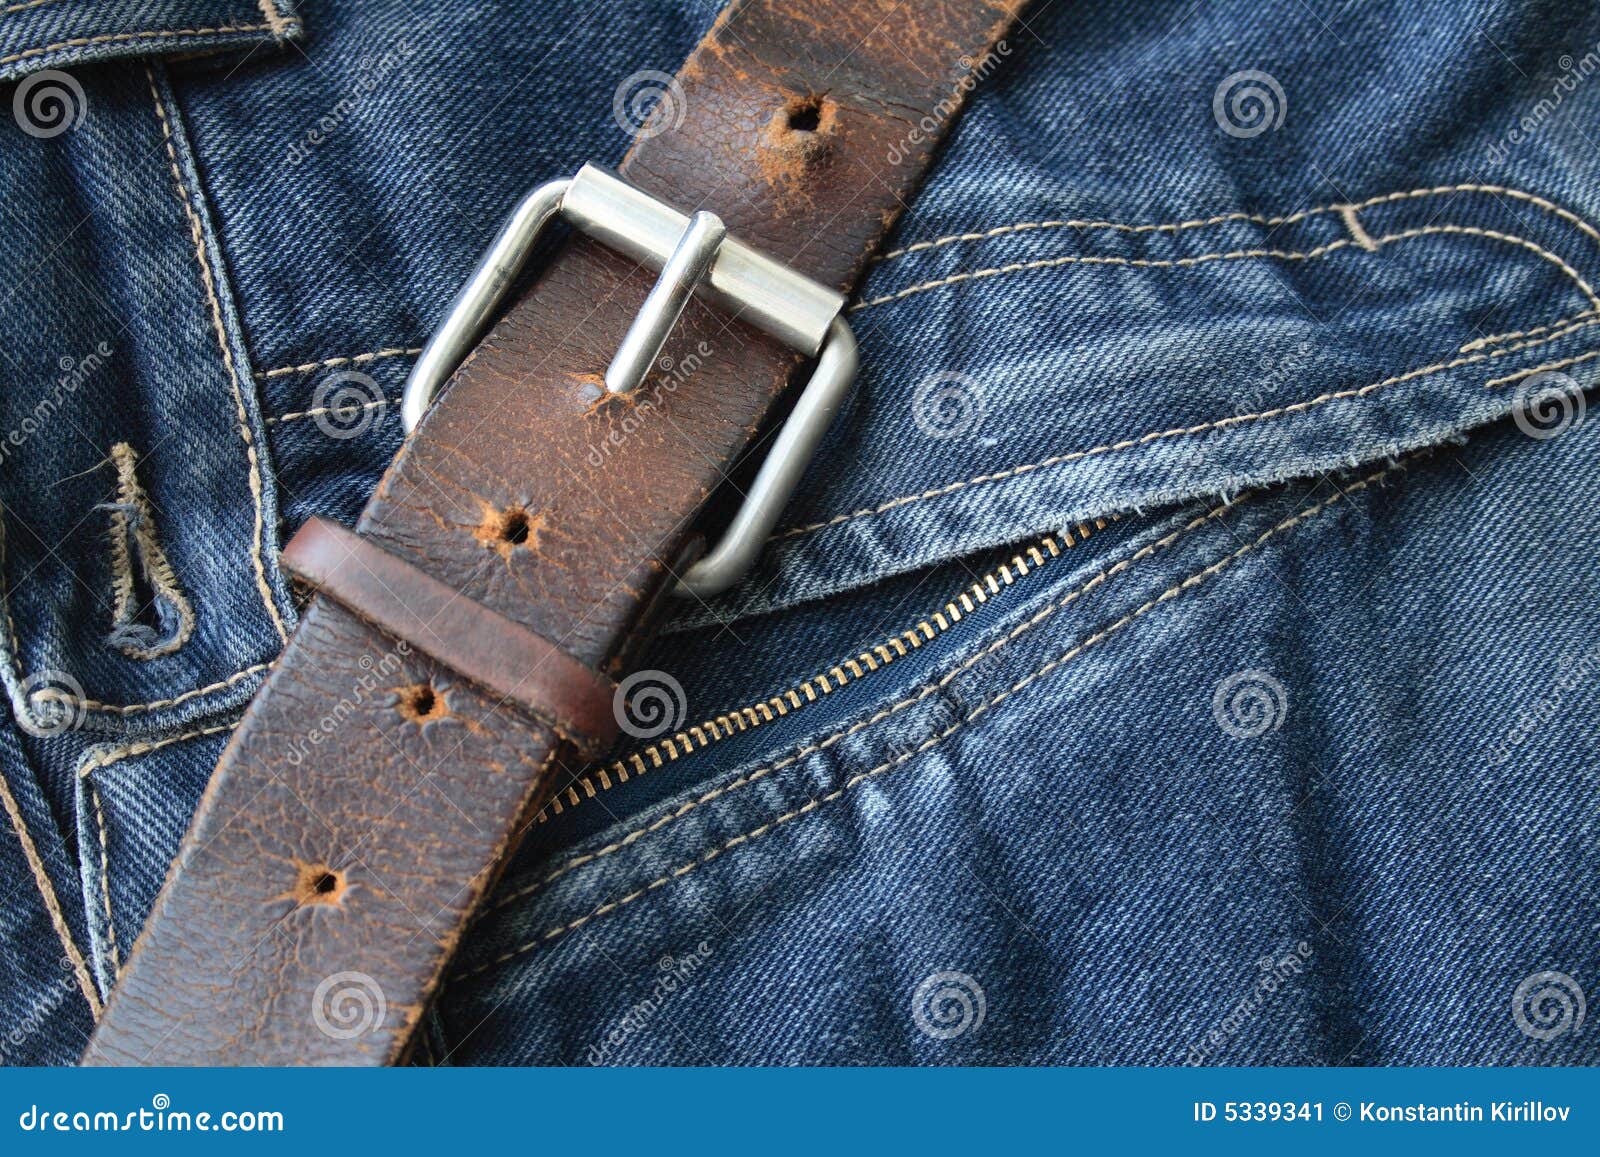 Old Belt And Jeans Stock Image - Image: 5339341